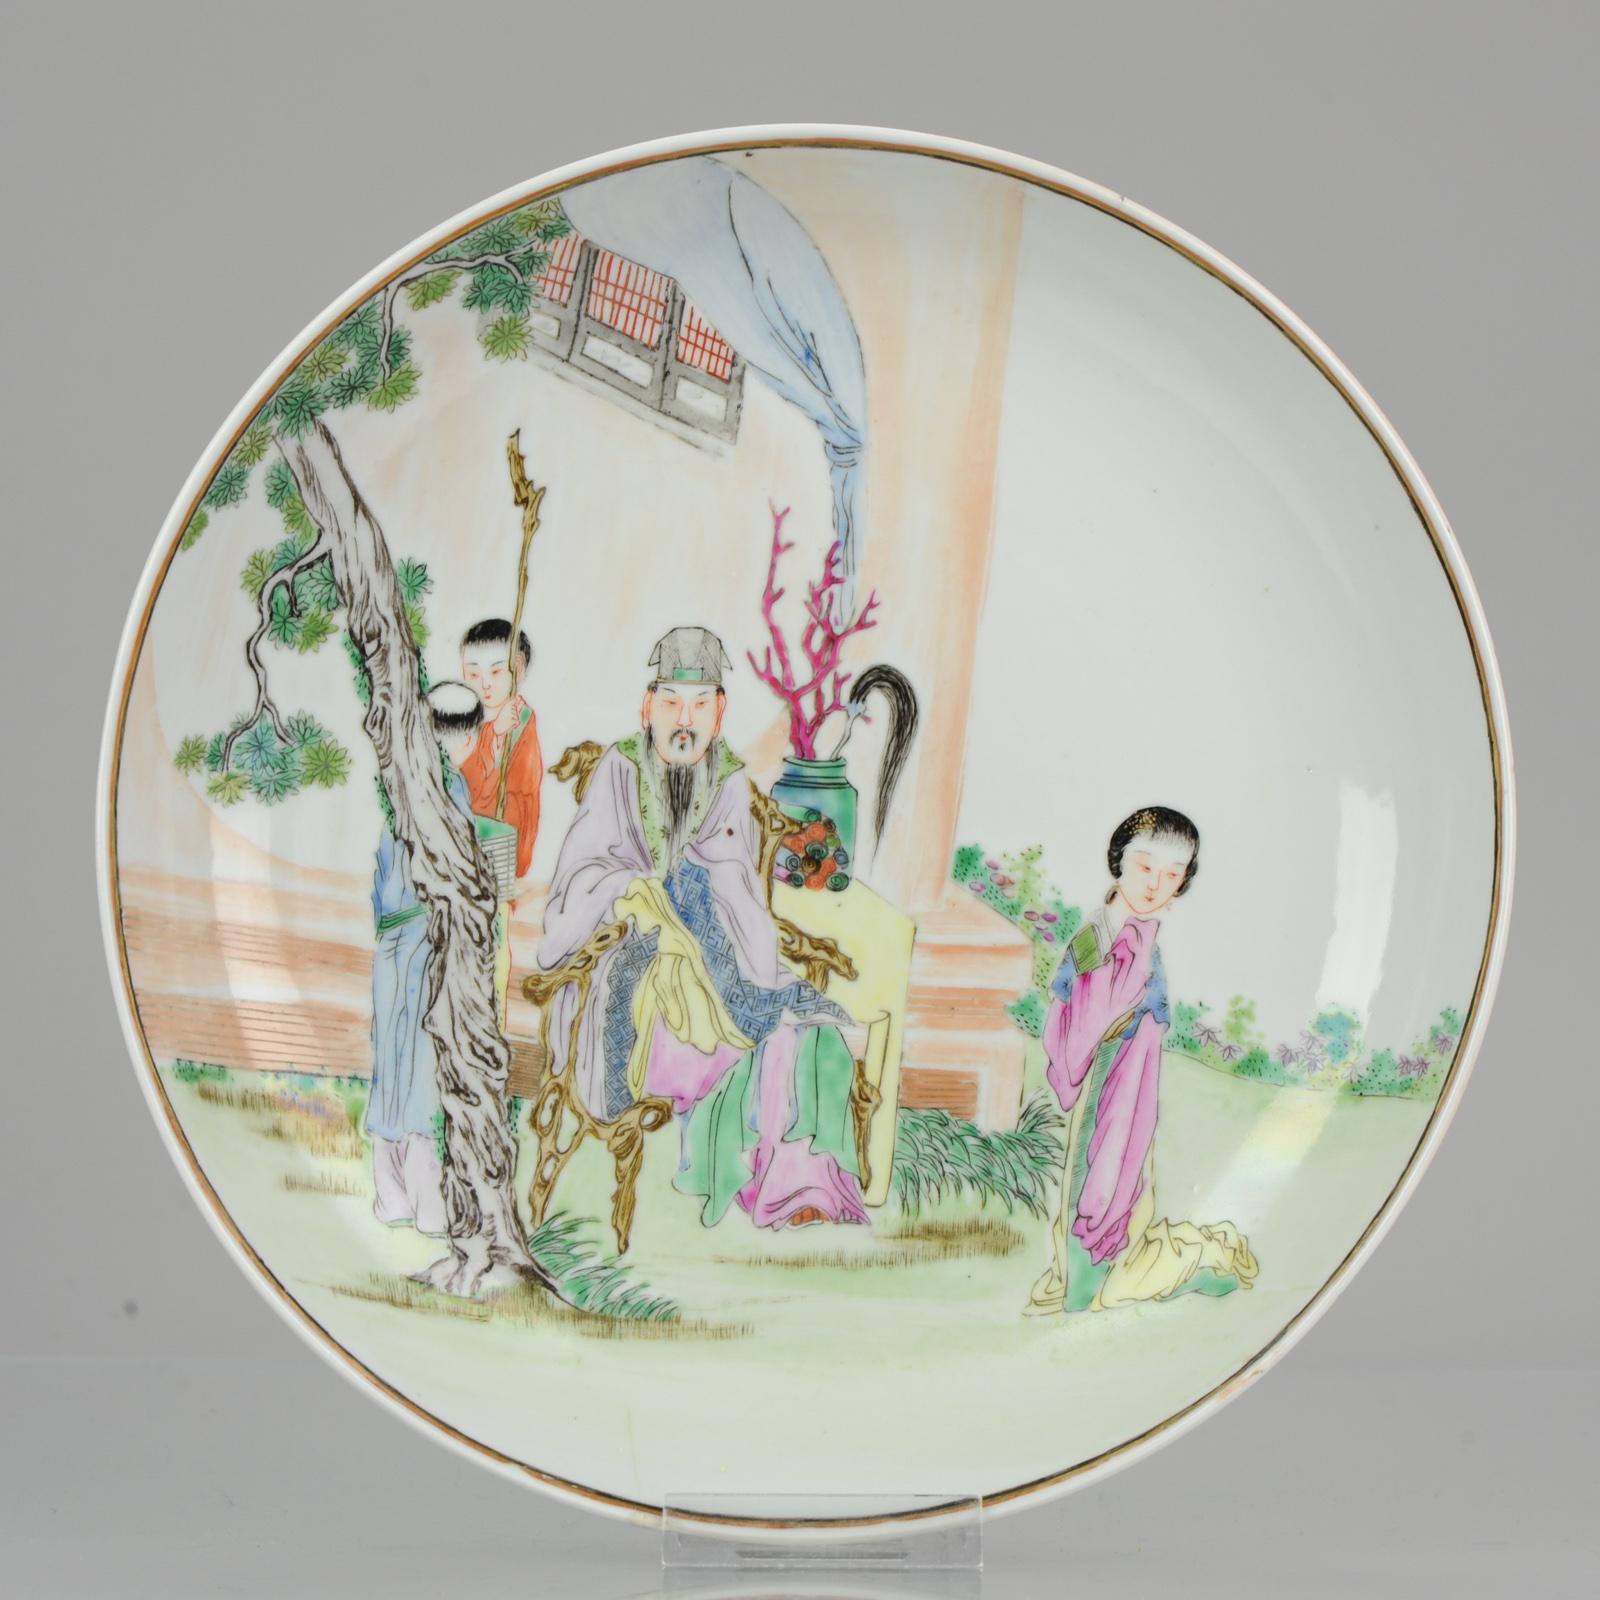 Description

Lovely and good quality dish of larger size.

Visible is a garden pagode scene of two male and two female figures. The person on the chair obviously is the central person in this househould and probabaly is a literati. The tree and